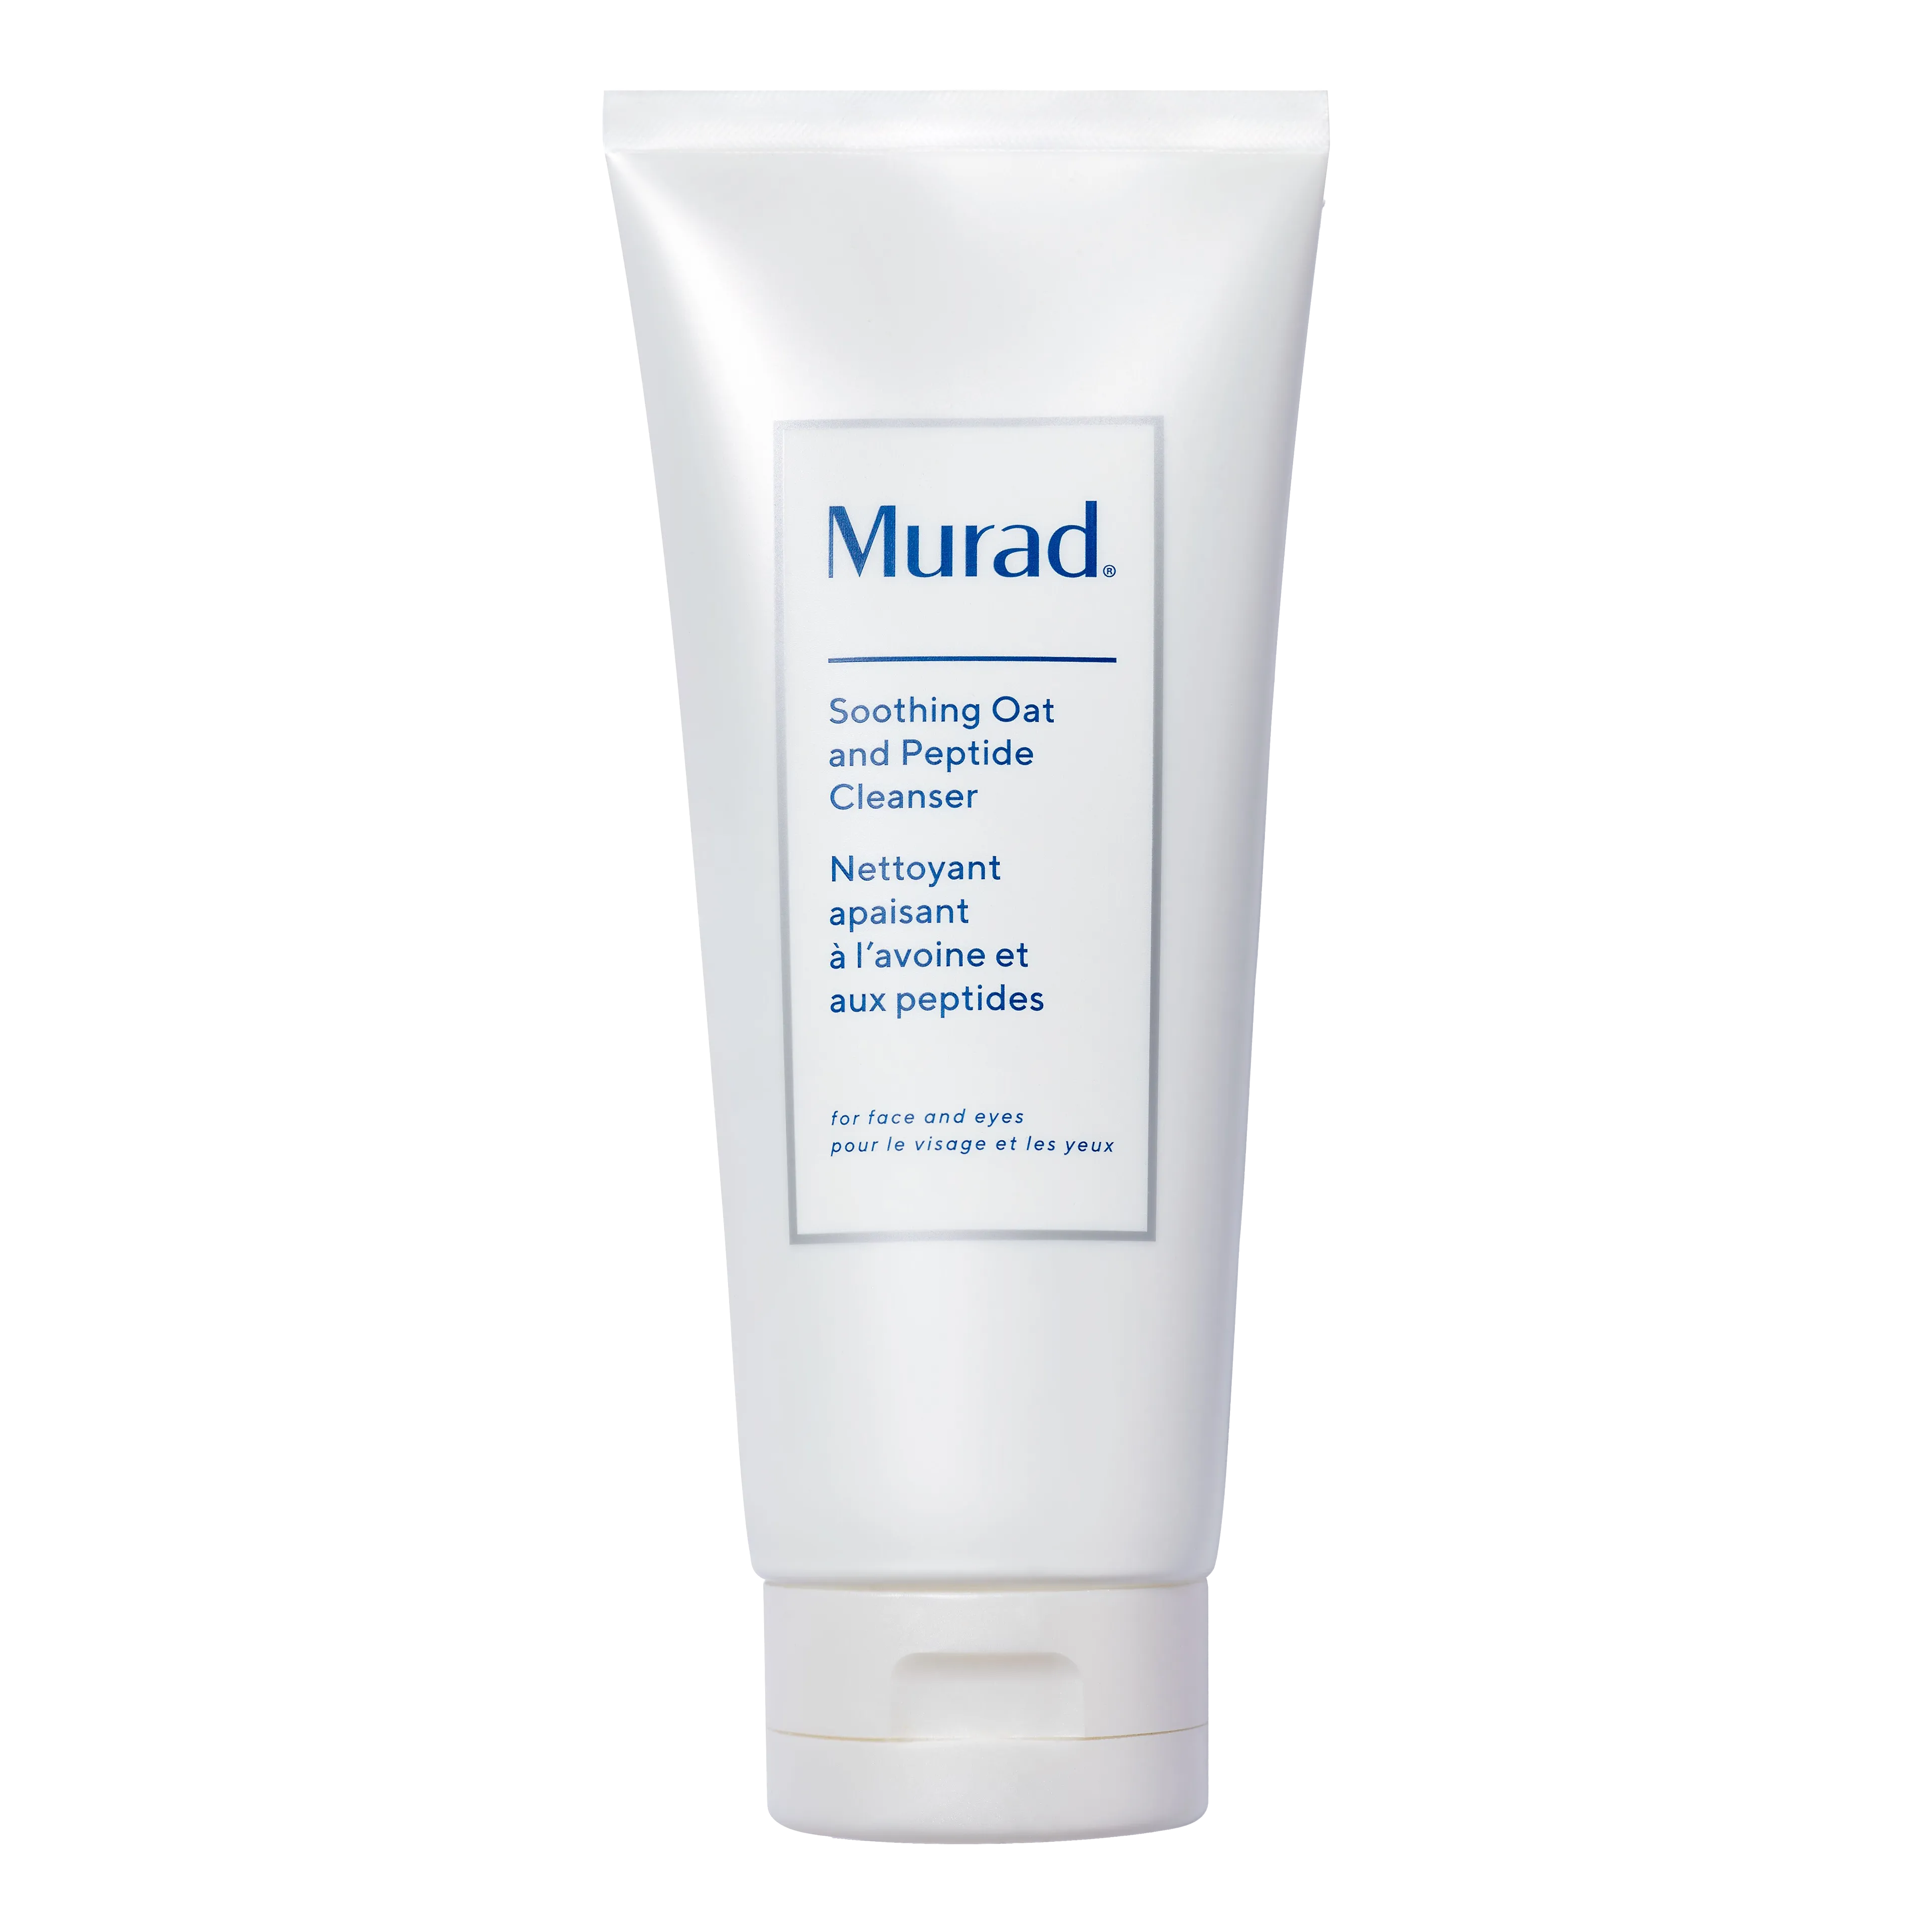 Murad ExaSoothe Soothing Oat and Peptide Cleanser 